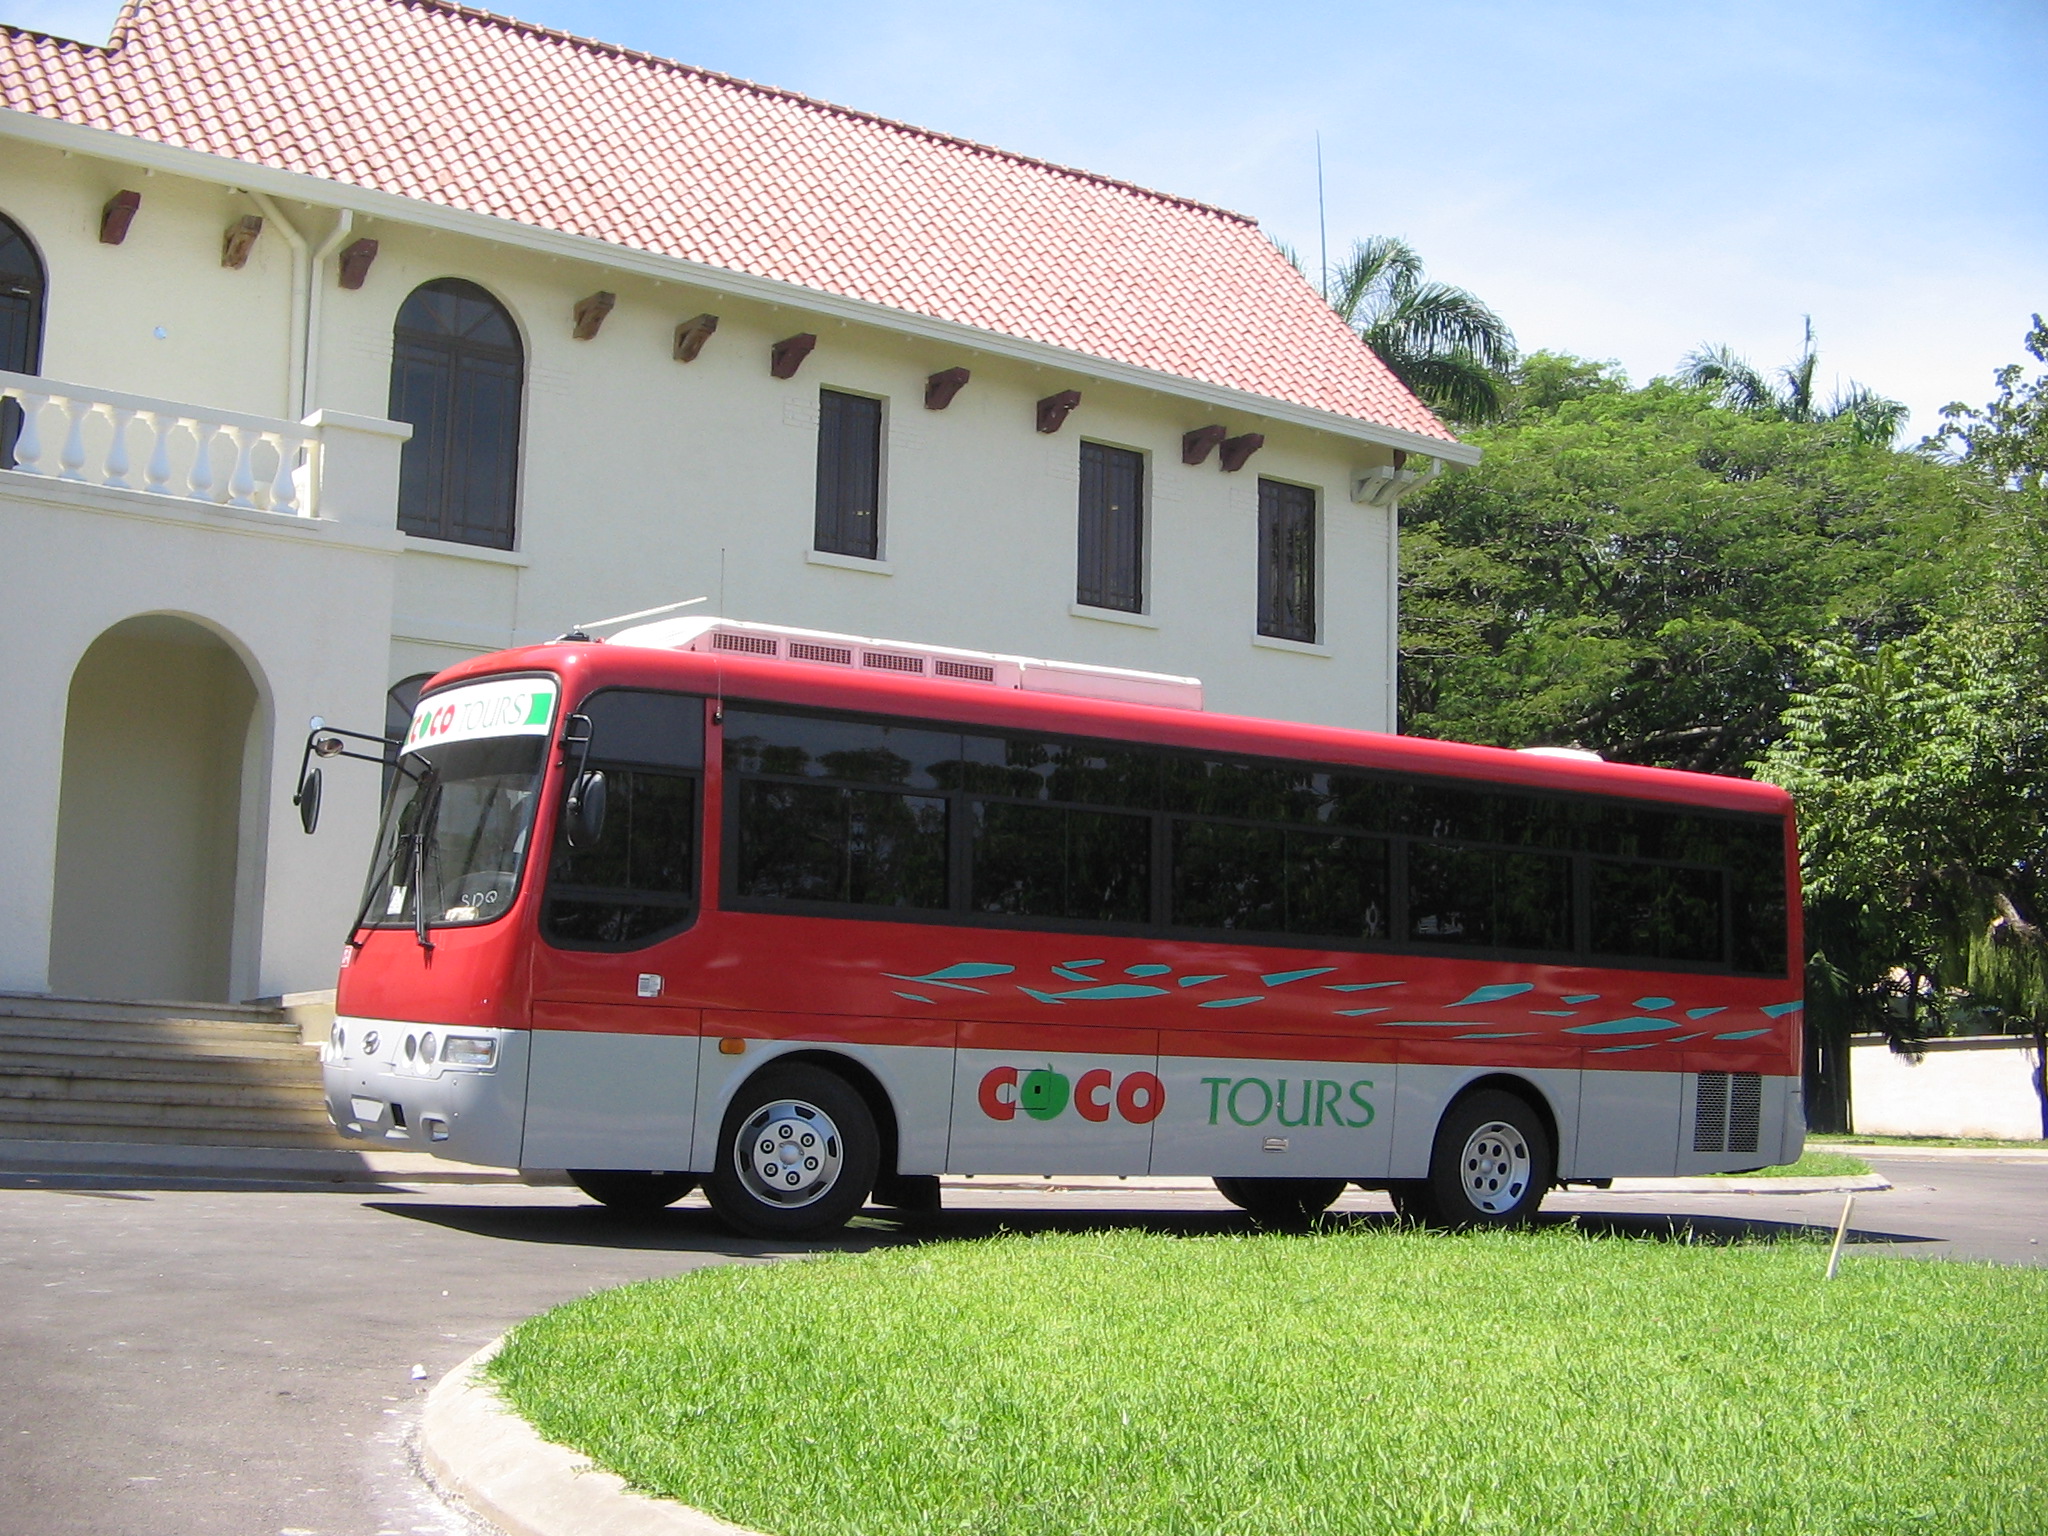 Larger Cocotours bus used on the route from Punta Cana to Amber Cove